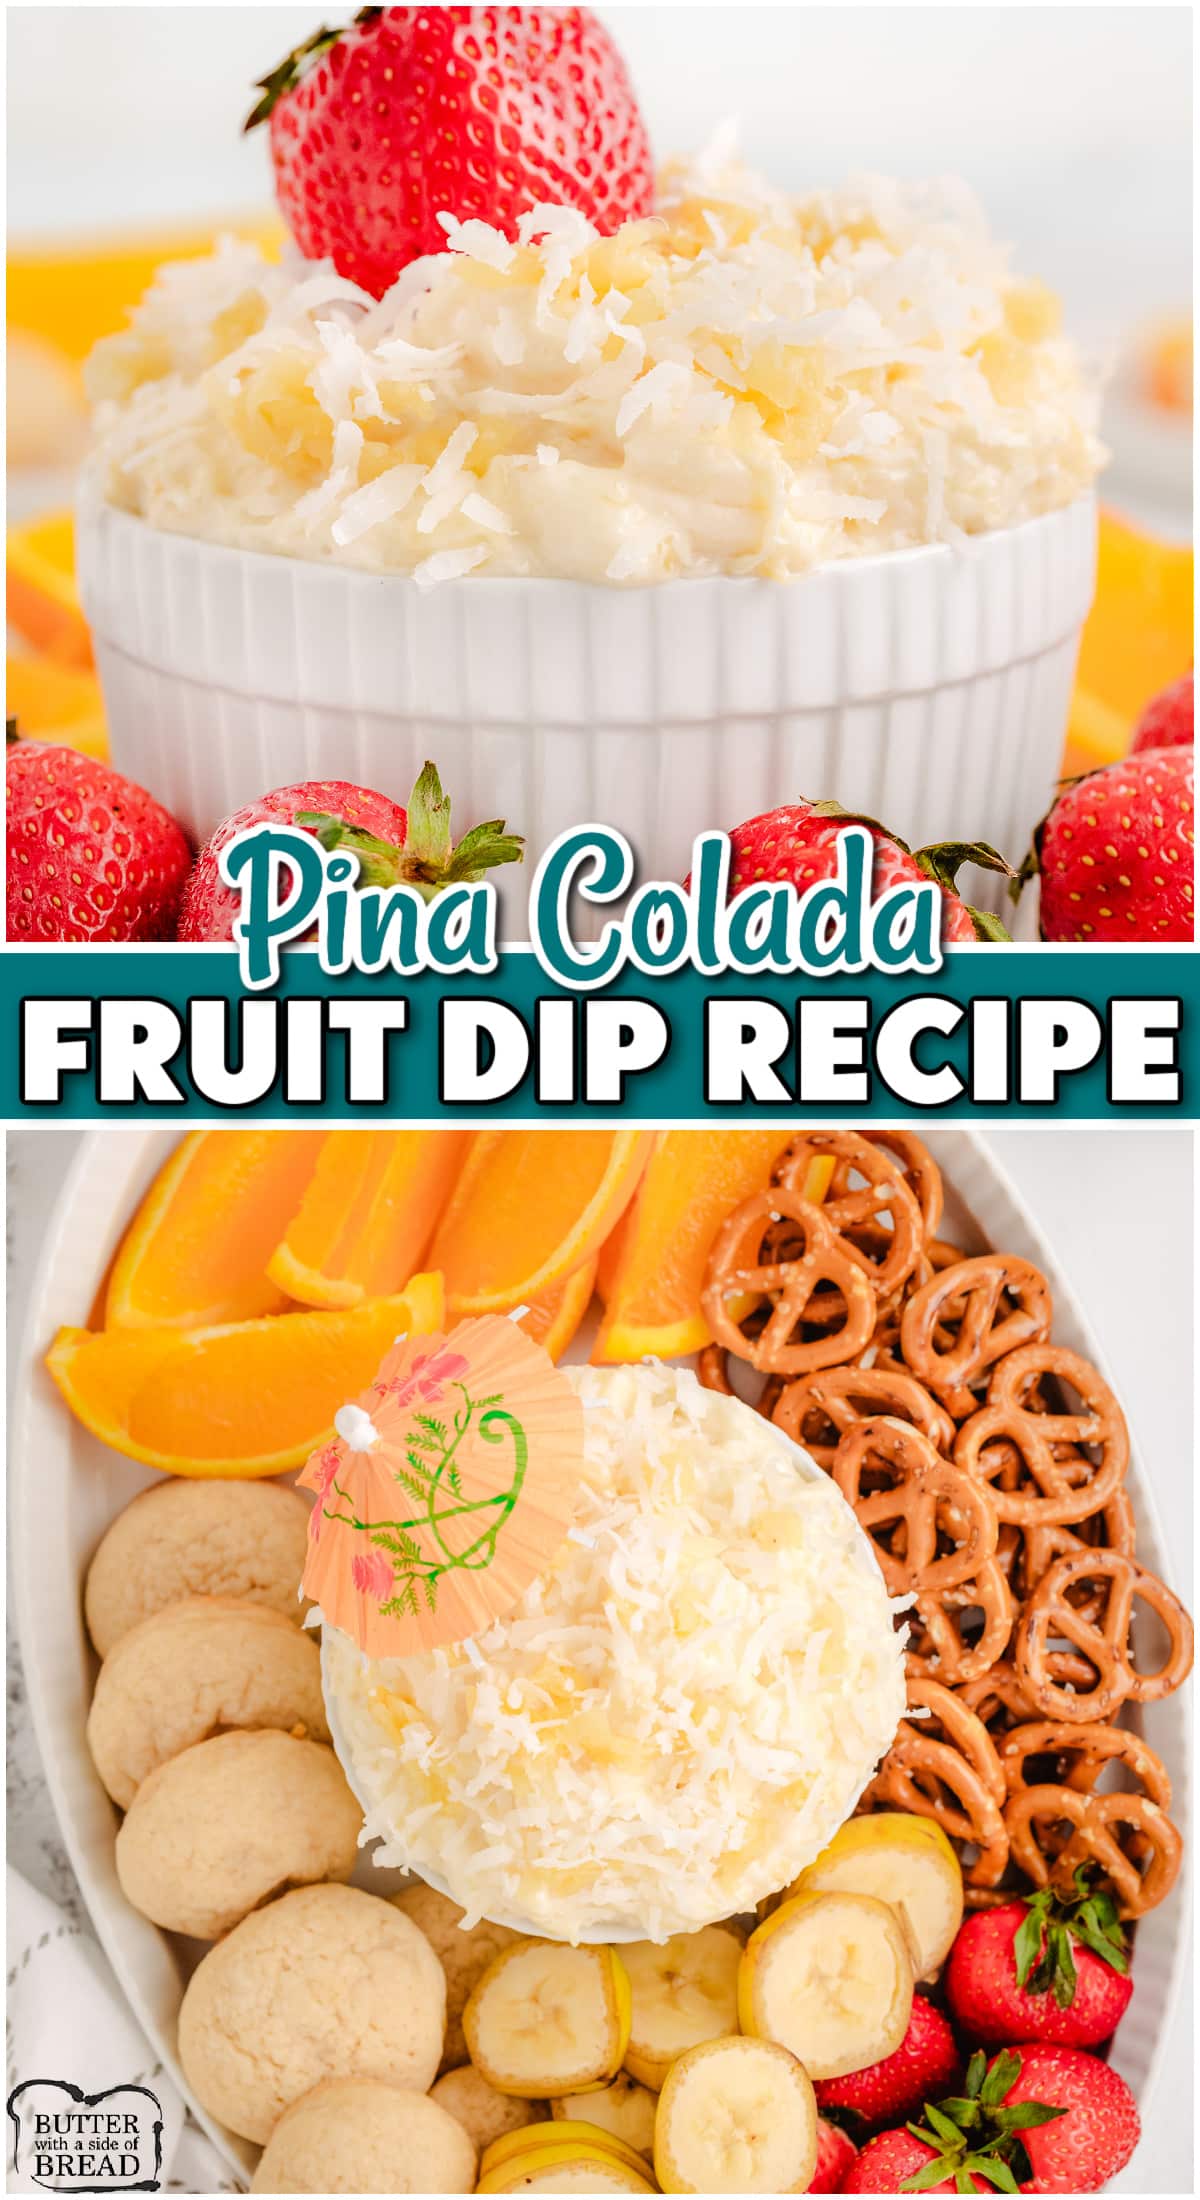 Pina Colada Fruit Dip is a delightful 4 ingredient dip with tangy tropical flavors! Pineapple, coconut, marshmallow creme & cream cheese combine in this sweet dessert perfect for parties!